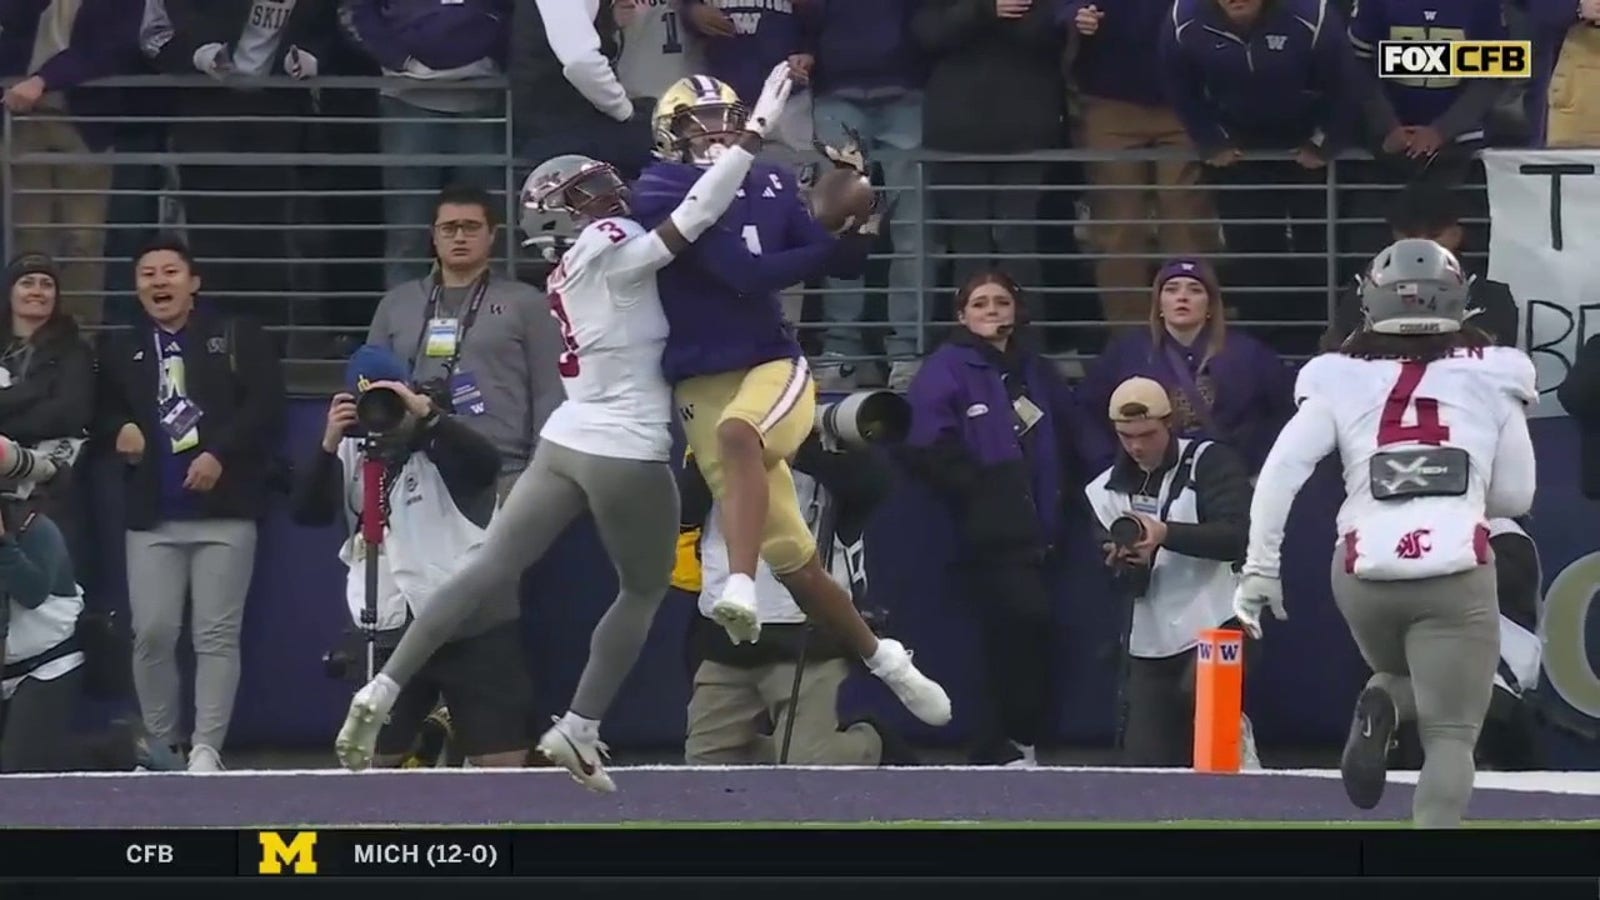 Rome Odunze hauls in his 2ND TD of the game to give Washington the lead against Washington State